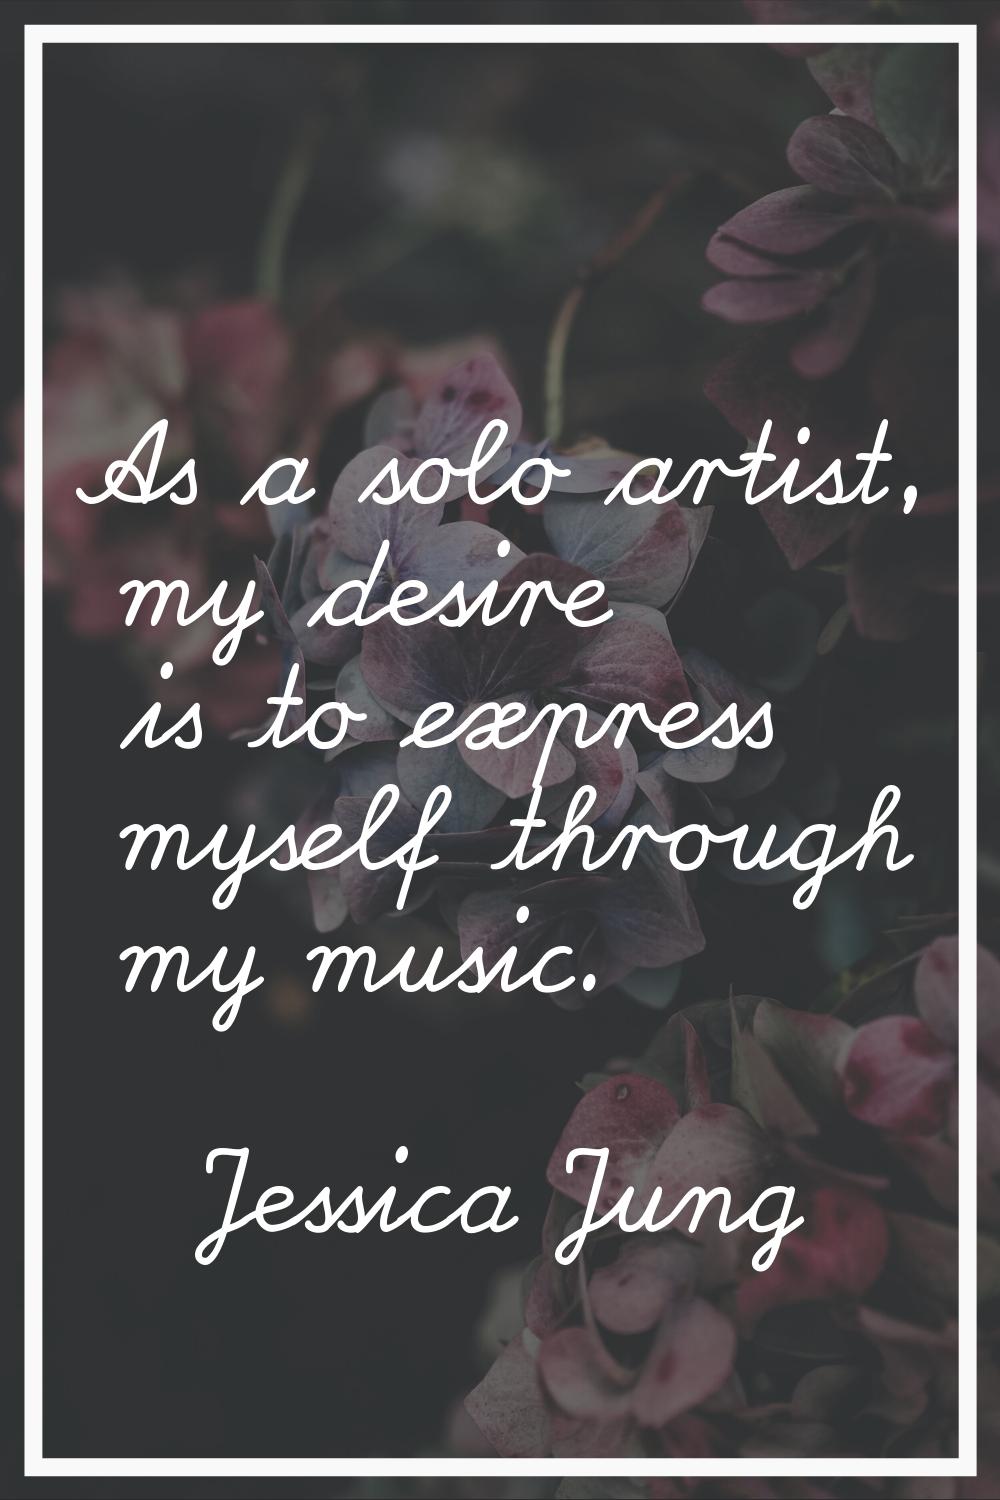 As a solo artist, my desire is to express myself through my music.